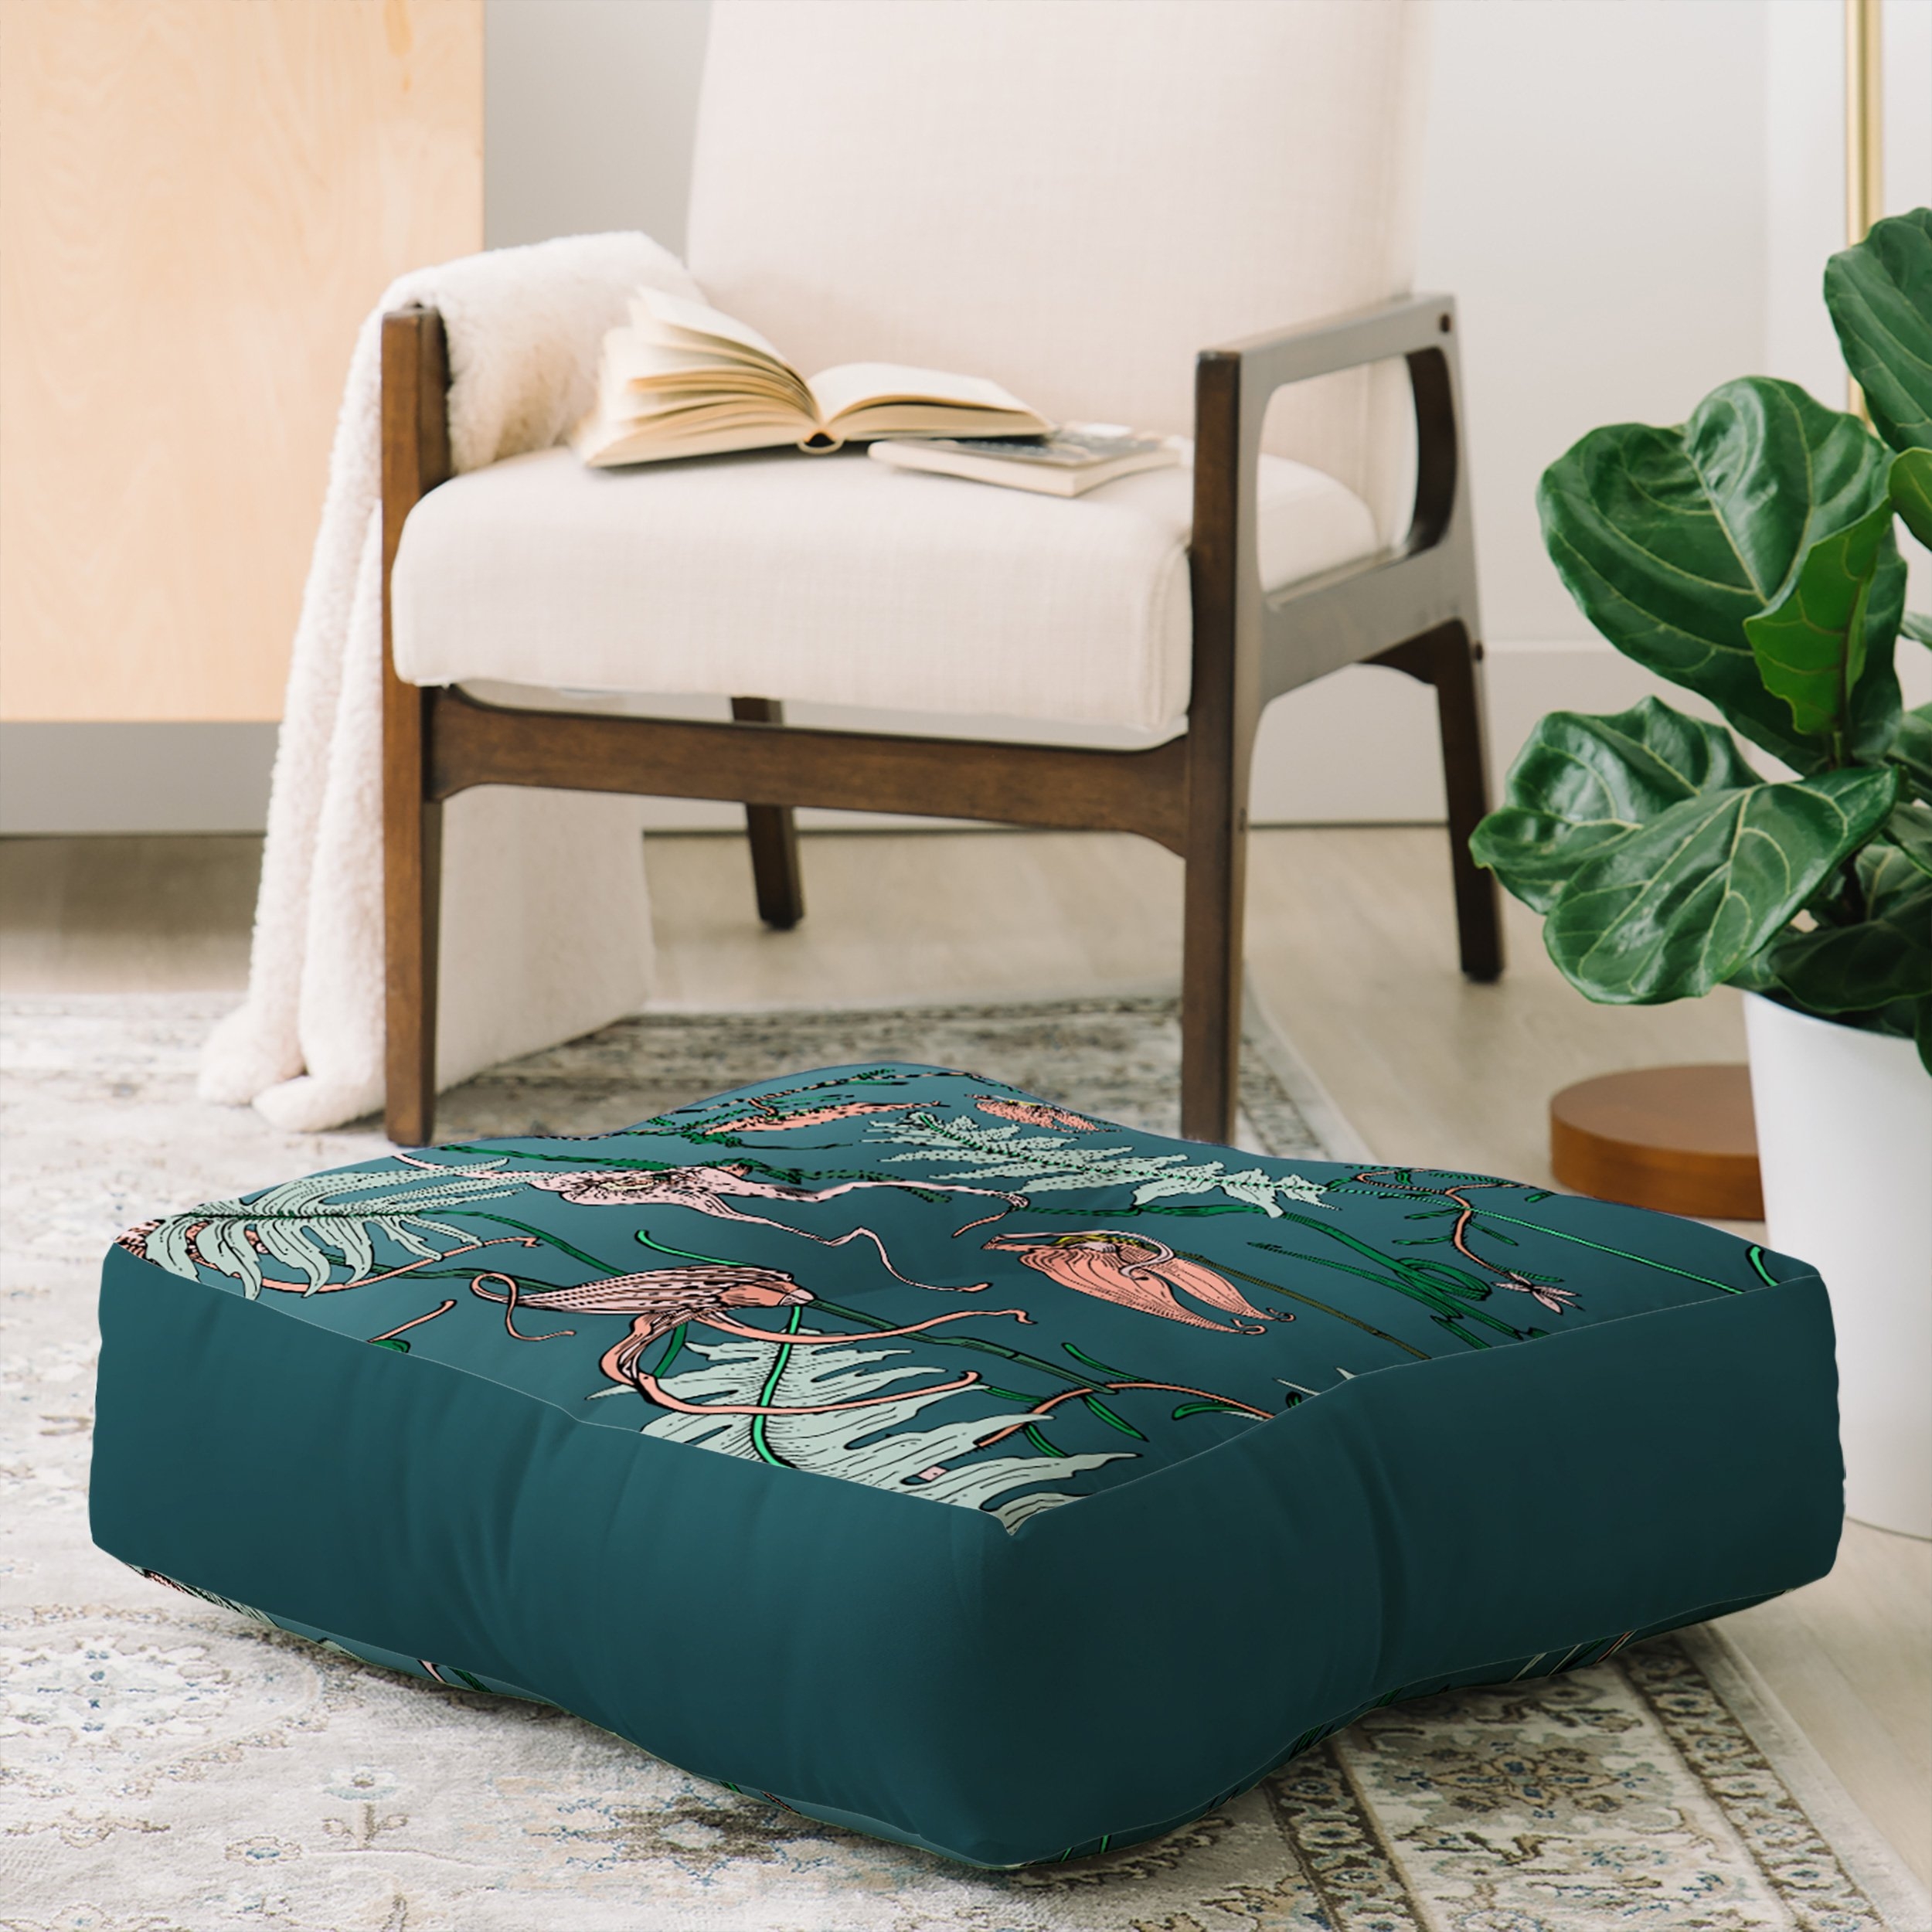 ORCHID BOTANICAL FLOOR PILLOW // SQUARE 26x26 - Image 1